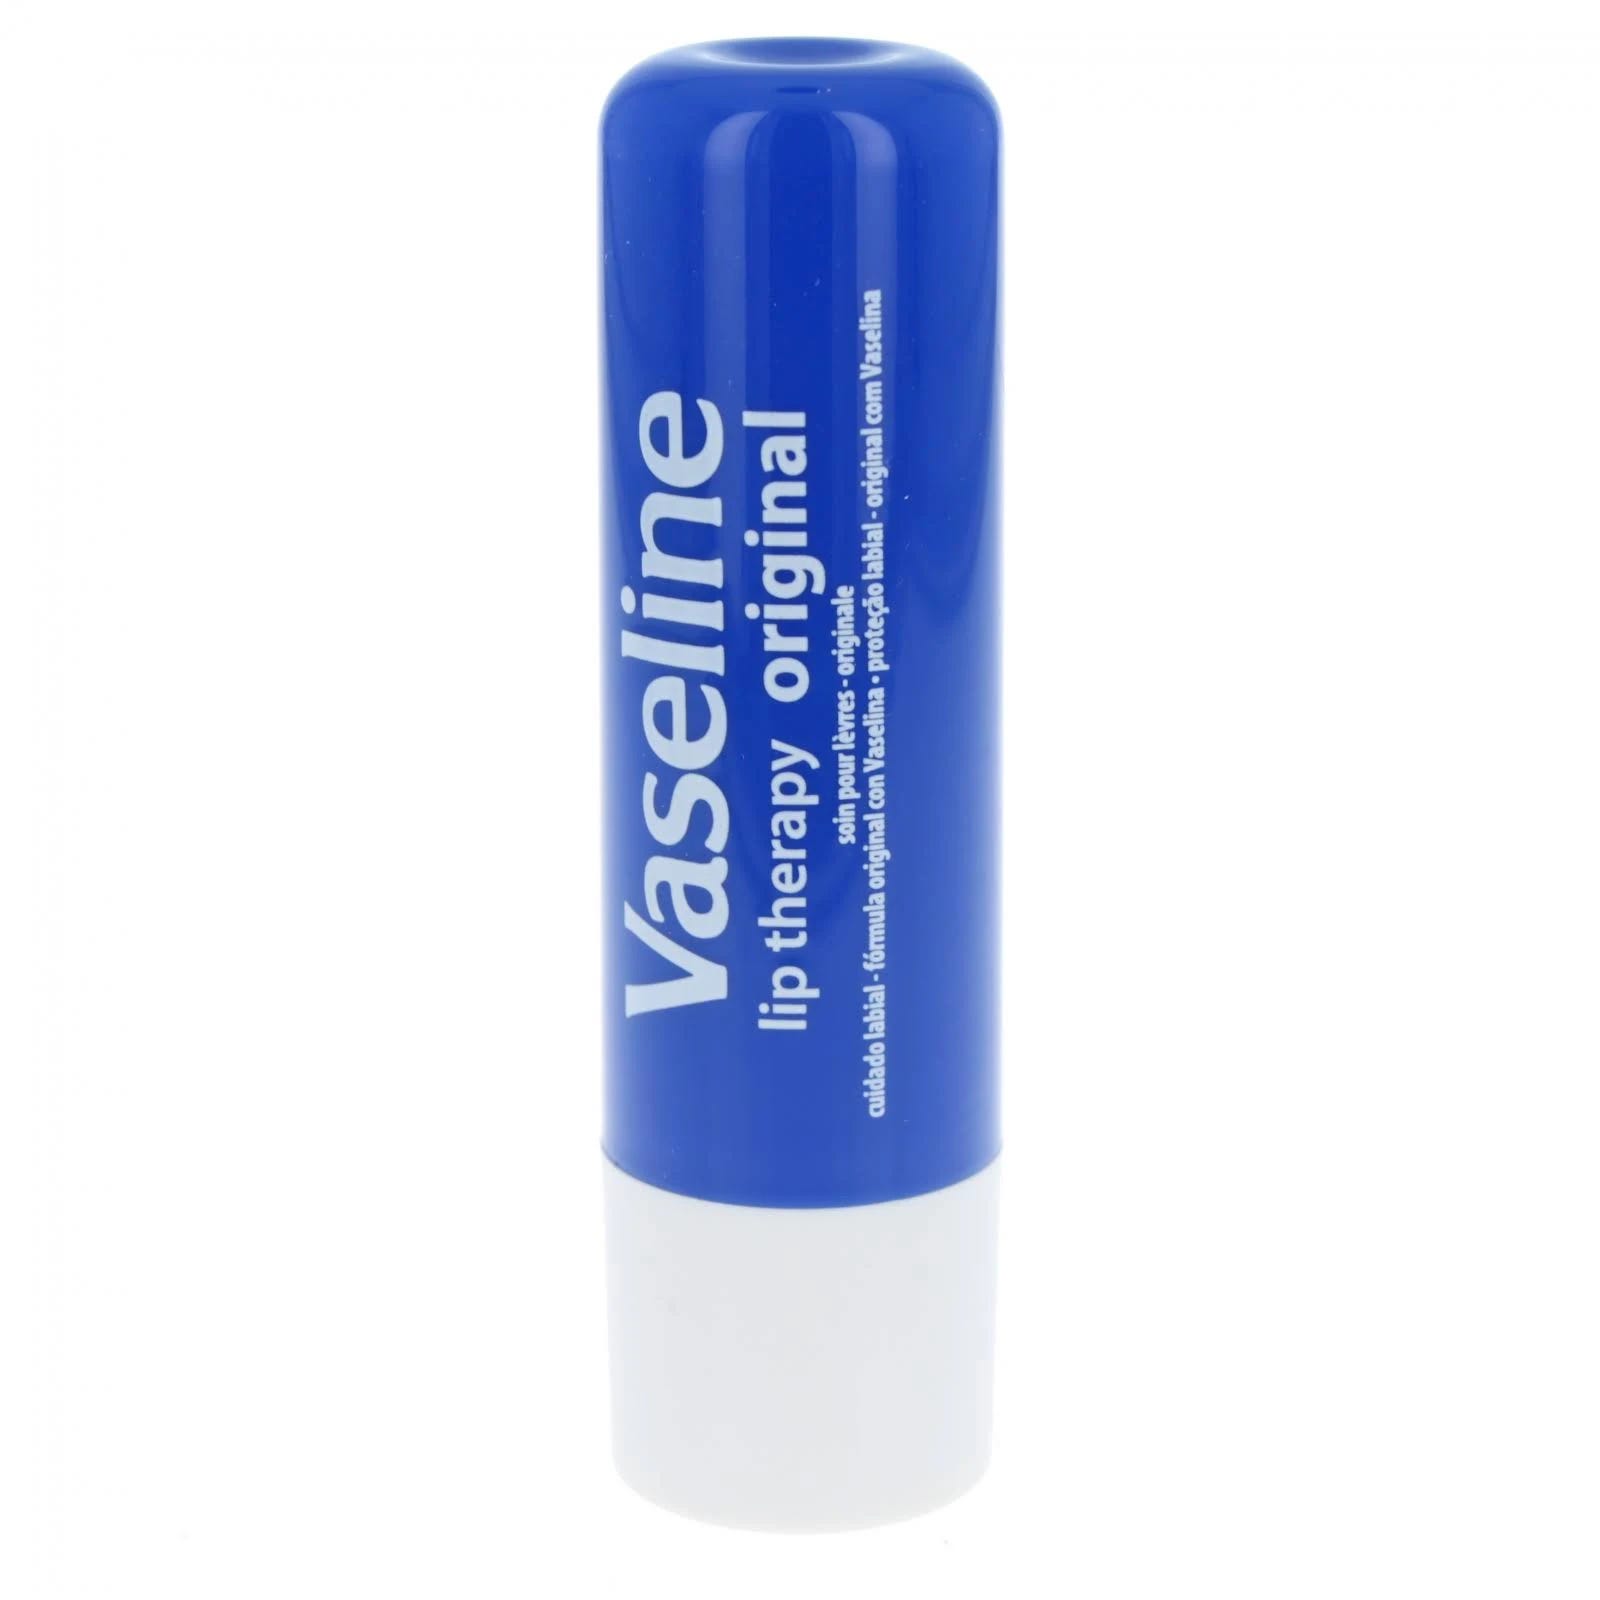 Vaseline Lip Therapy: Original Petroleum Jelly Lip Balm - Rich & Soothing | Image